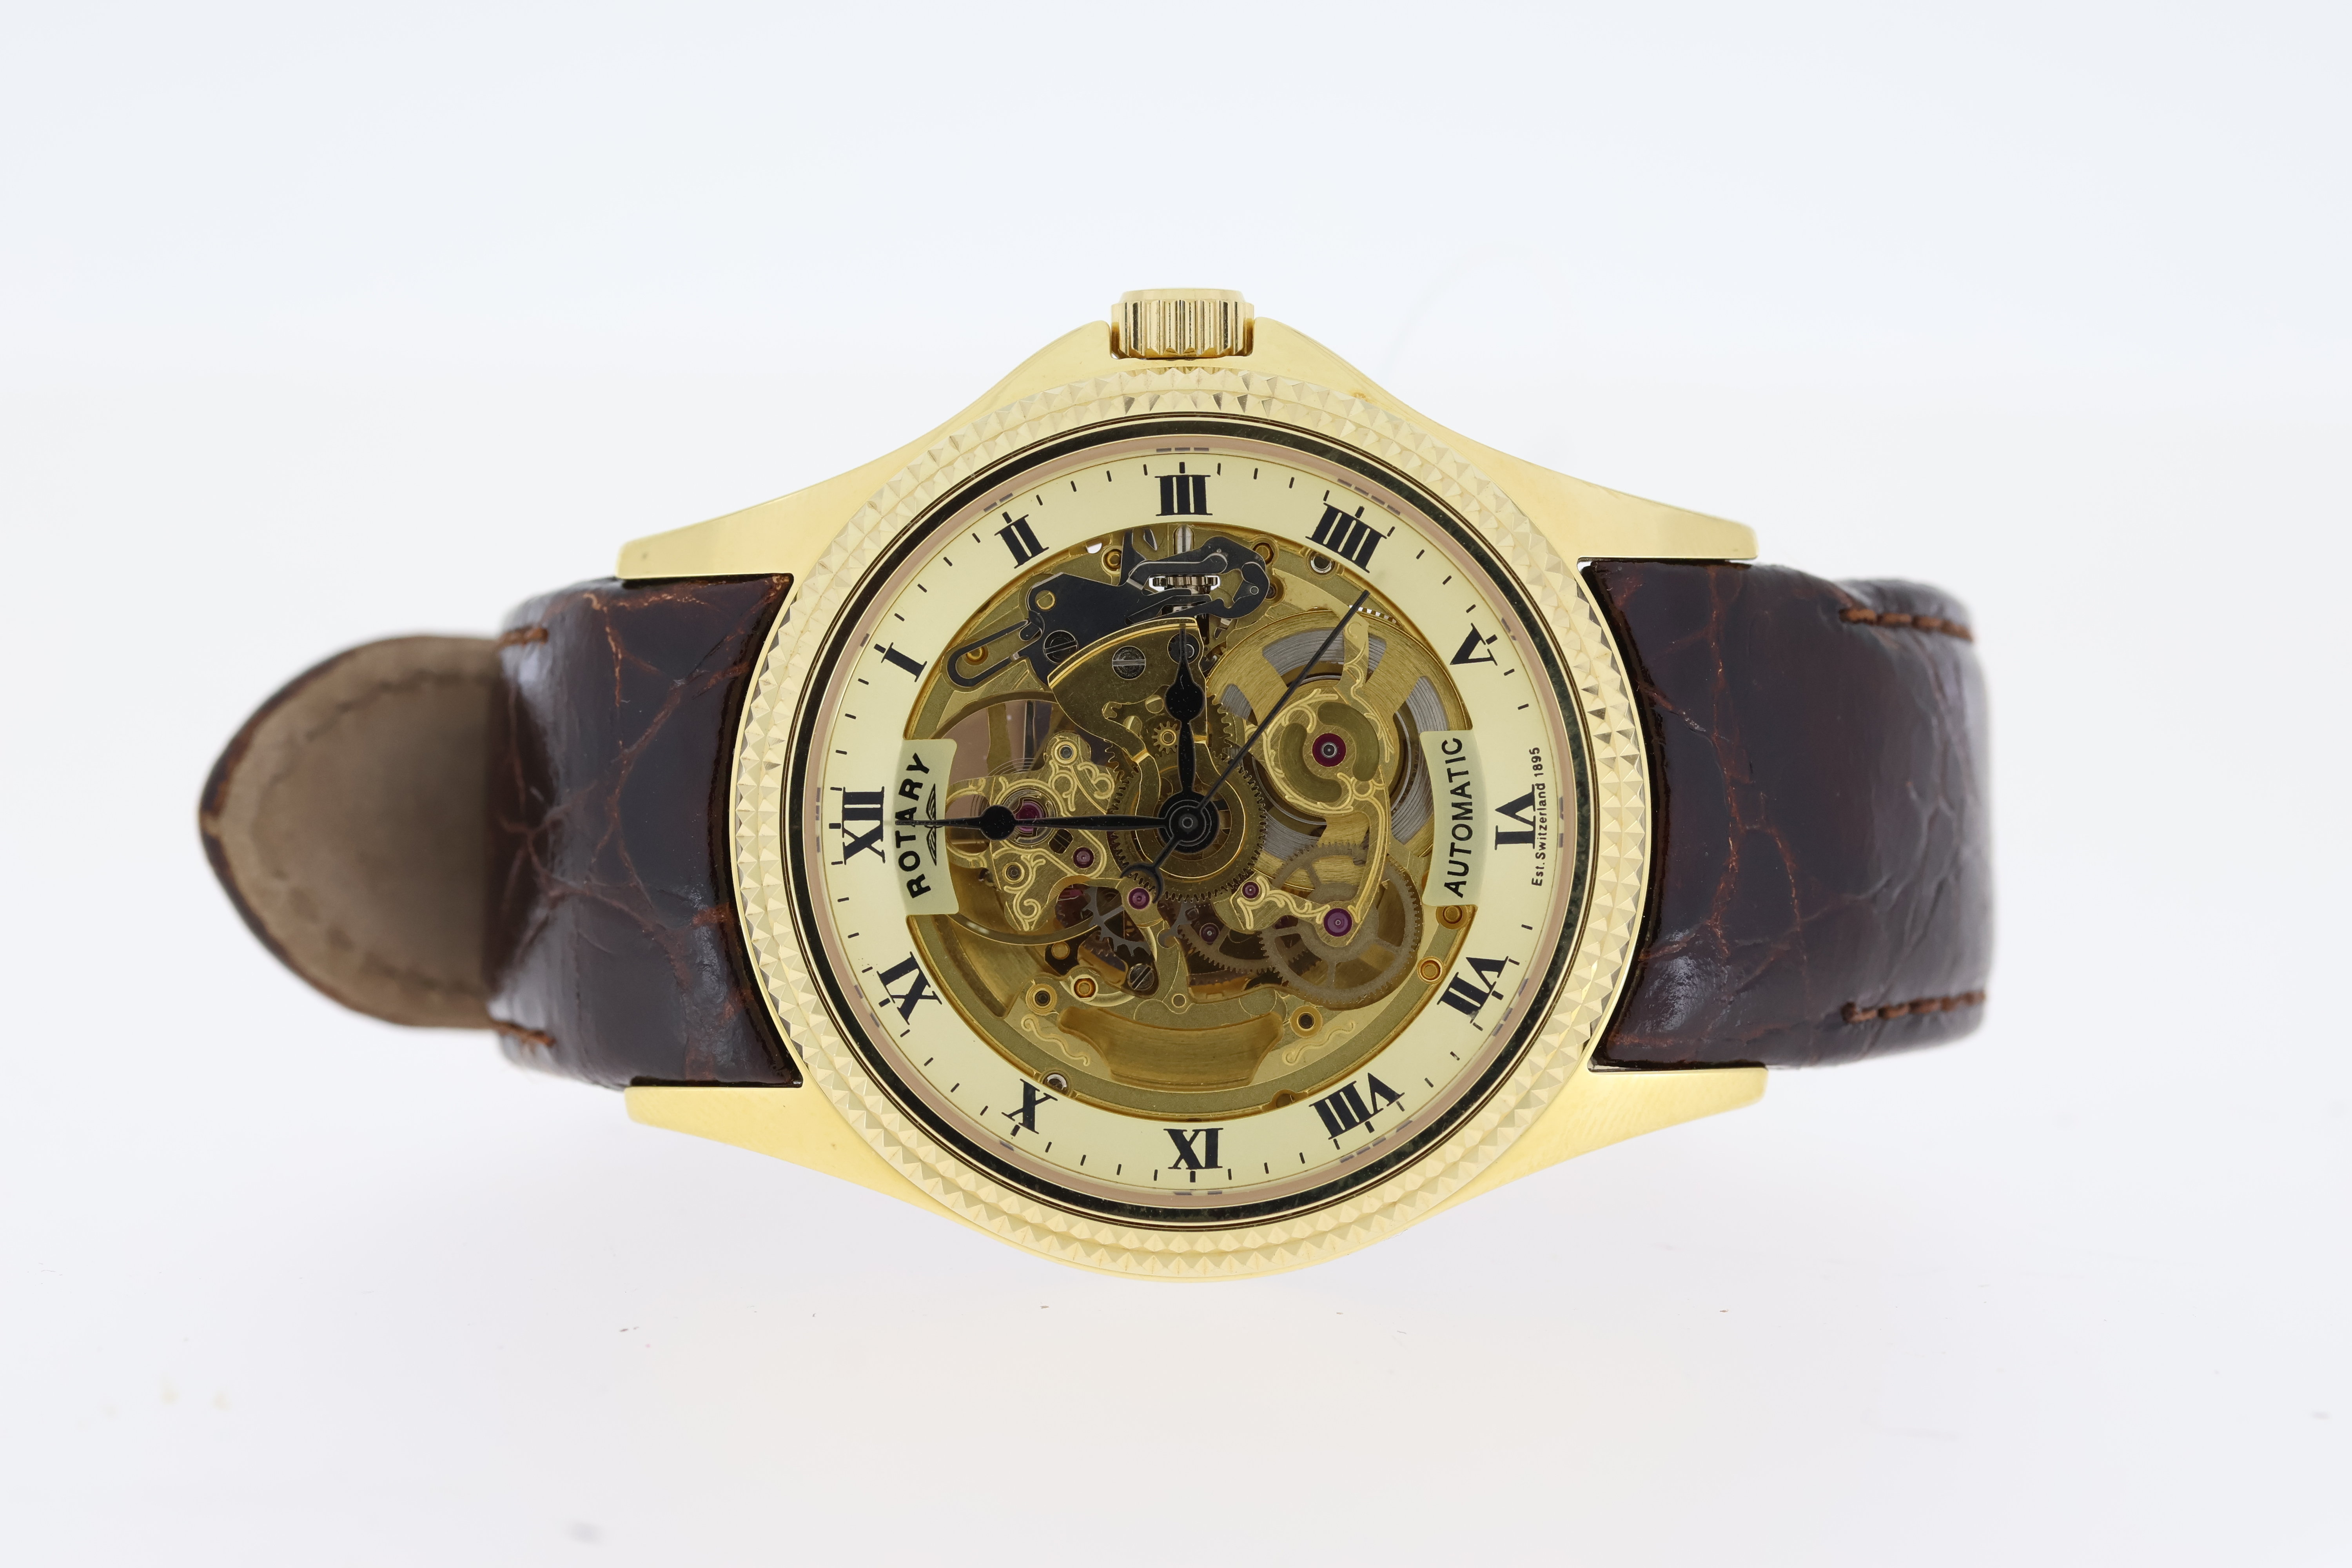 ROTARY OPEN WORK LIMITED EDITION. AUTOMATIC WATCH REFERENCE LE00008/09 W/WATCHWINDER BOX. Approx